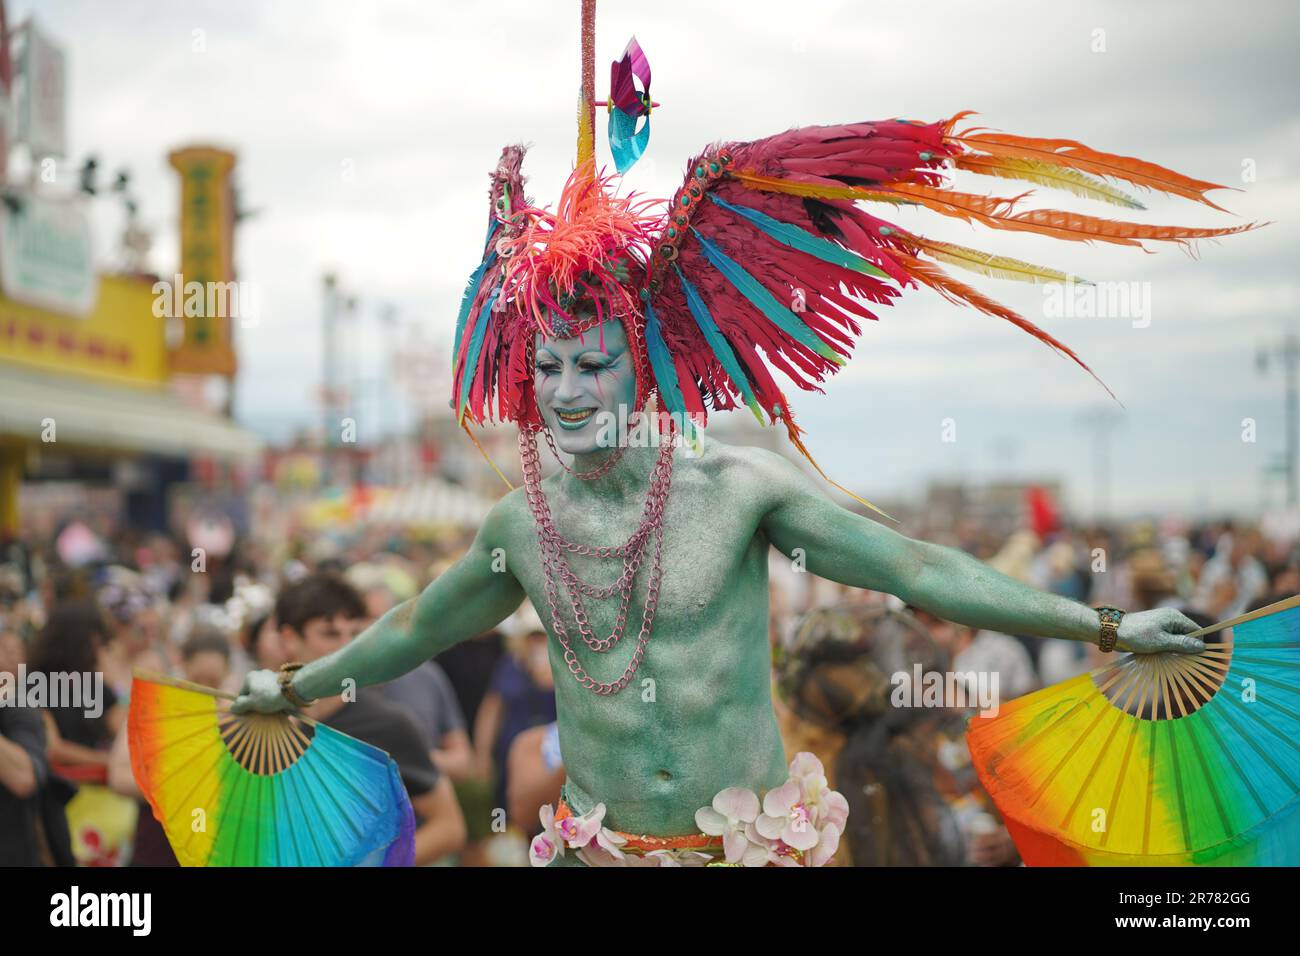 NEW YORK - JUNE 18, 2022: Participant posing during the 40th Annual Mermaid Parade at Coney Island, the largest parade in the nation and a celebration Stock Photo